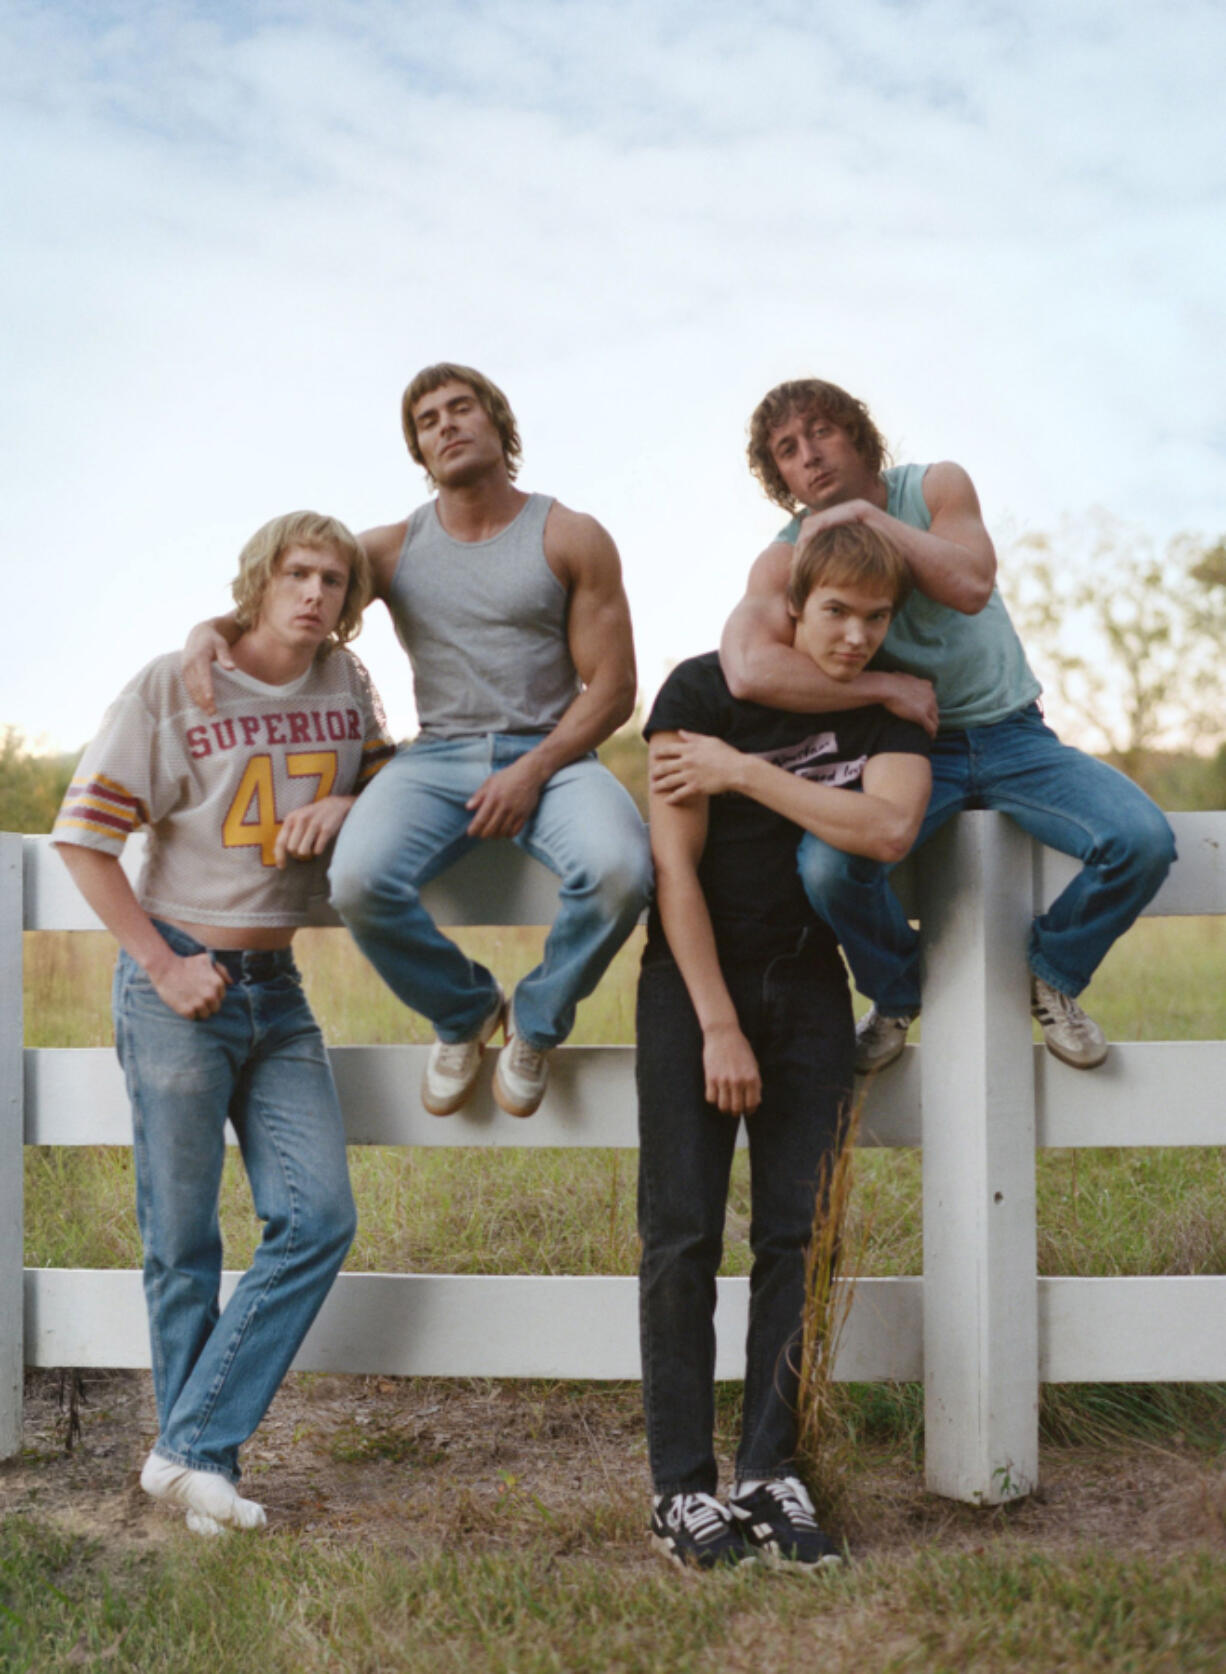 From left, Harris Dickinson, Zac Efron, Stanley Simons and Jeremy Allen White in &Ccedil;&fnof;&uacute;The Iron Claw.&Ccedil;&fnof;&ugrave; (Eric Chakeen/A24/TNS)